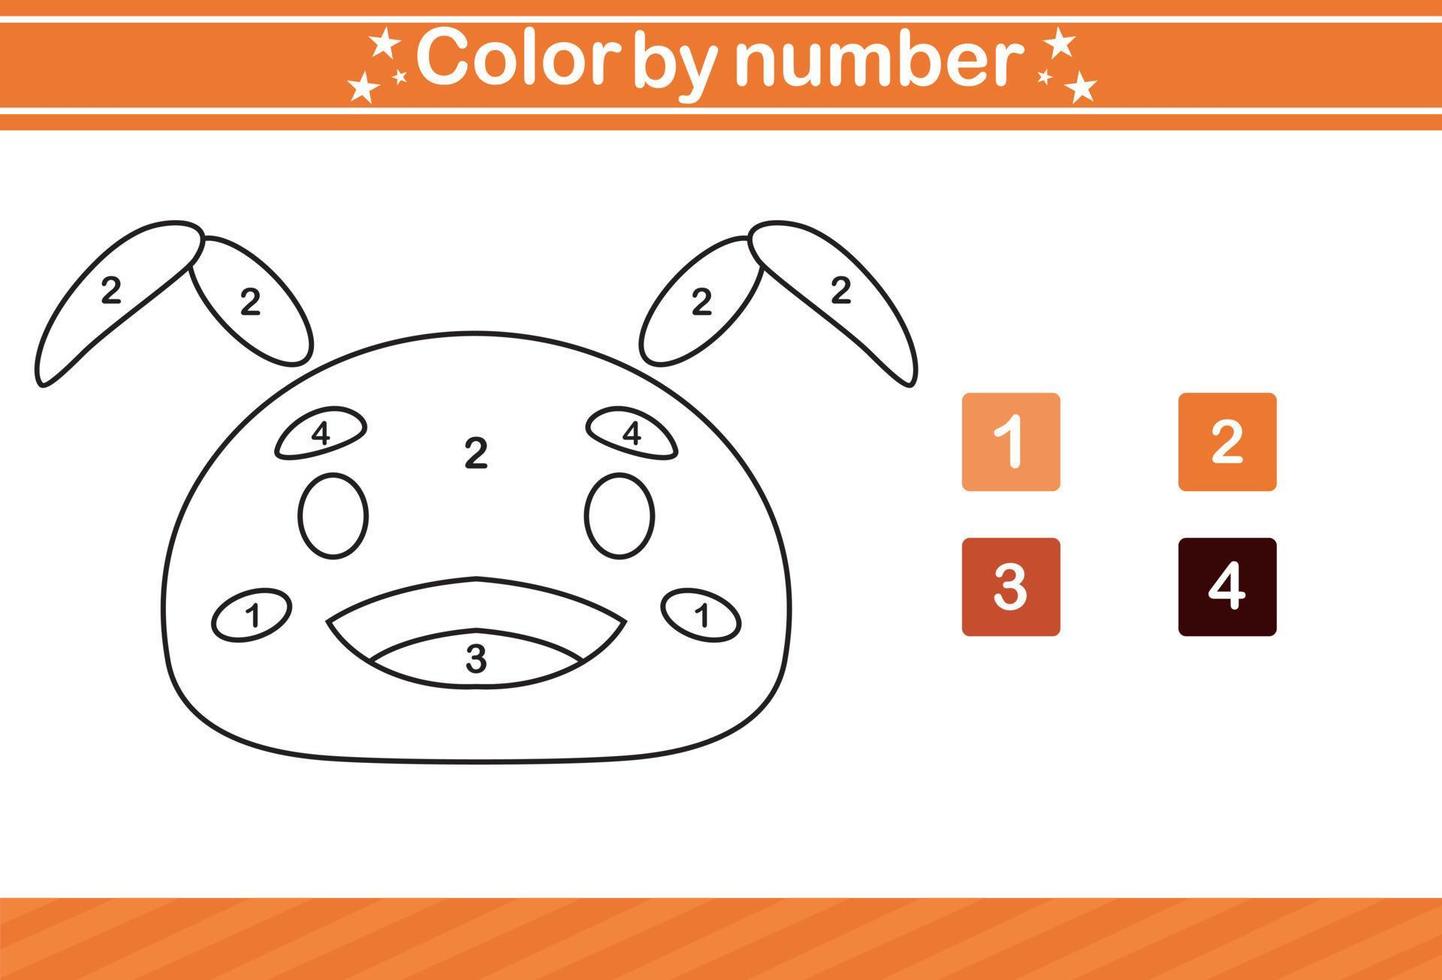 color by number of cute insect Educational game suitable for kids and preschool vector